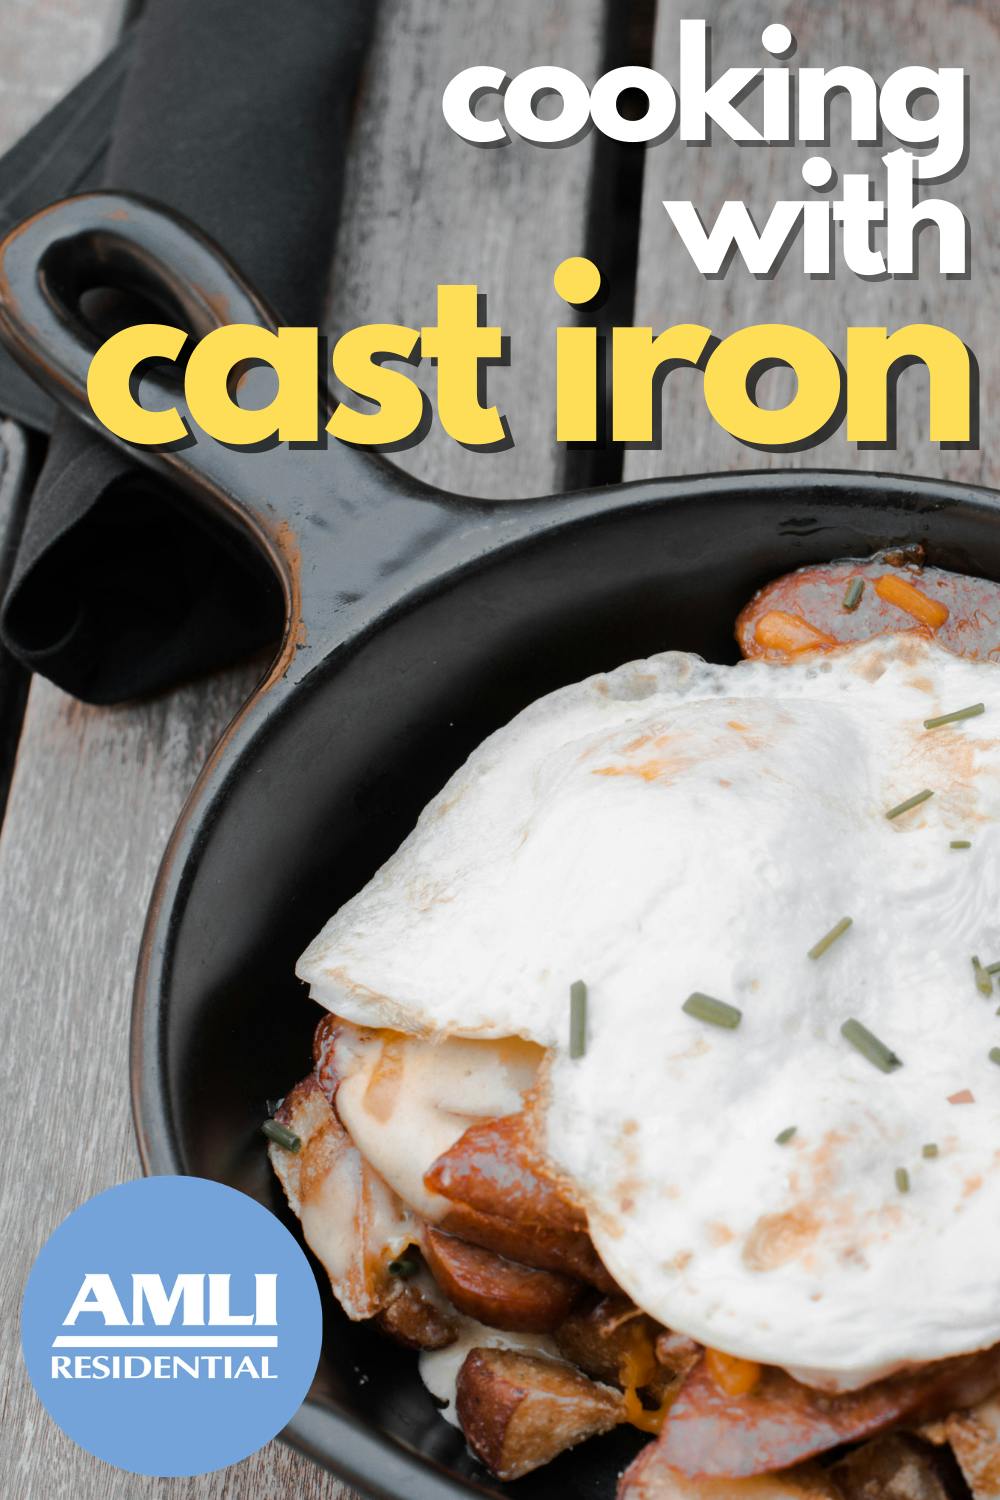 https://images.prismic.io/amli-website/3f51fbe2-c0f0-4eaa-a18b-1980c57abb24_blog_cooking+with+cast+iron+pinterest+pin.png?auto=compress,format